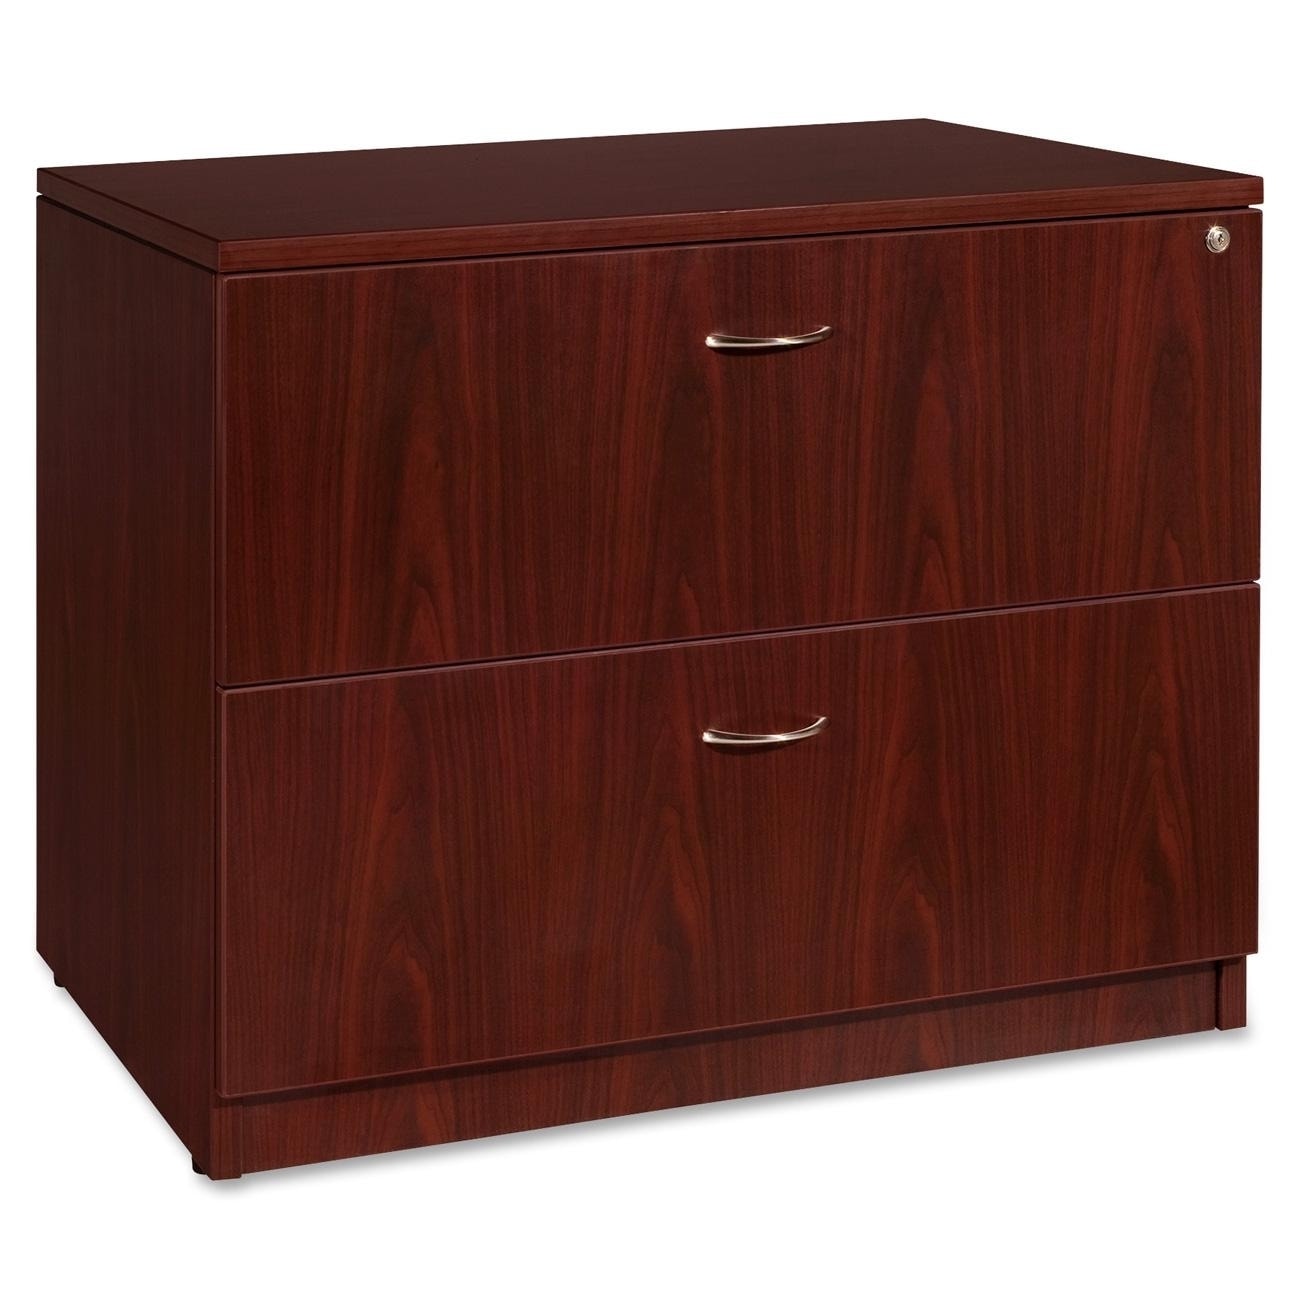 Shop Lorell Essentials Mahogany Lateral File Overstock 9261954